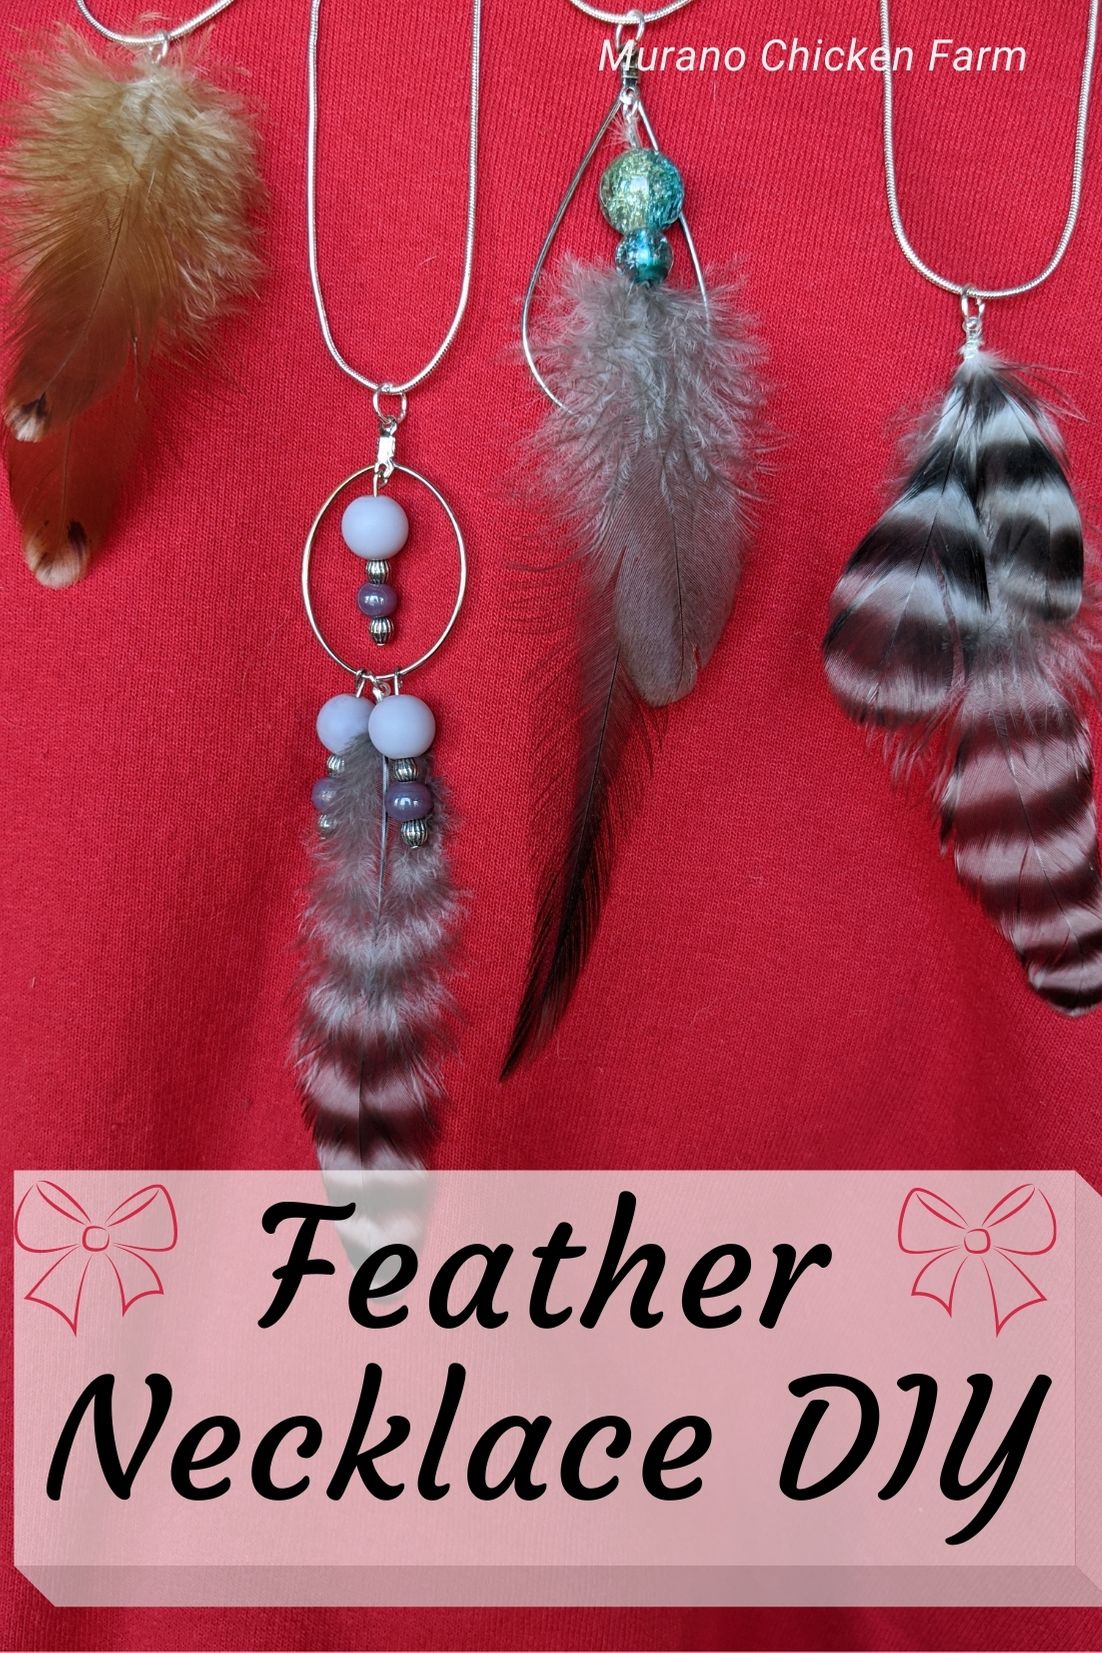 Red Rooster Feathers Sticking Out in Different Directions As a